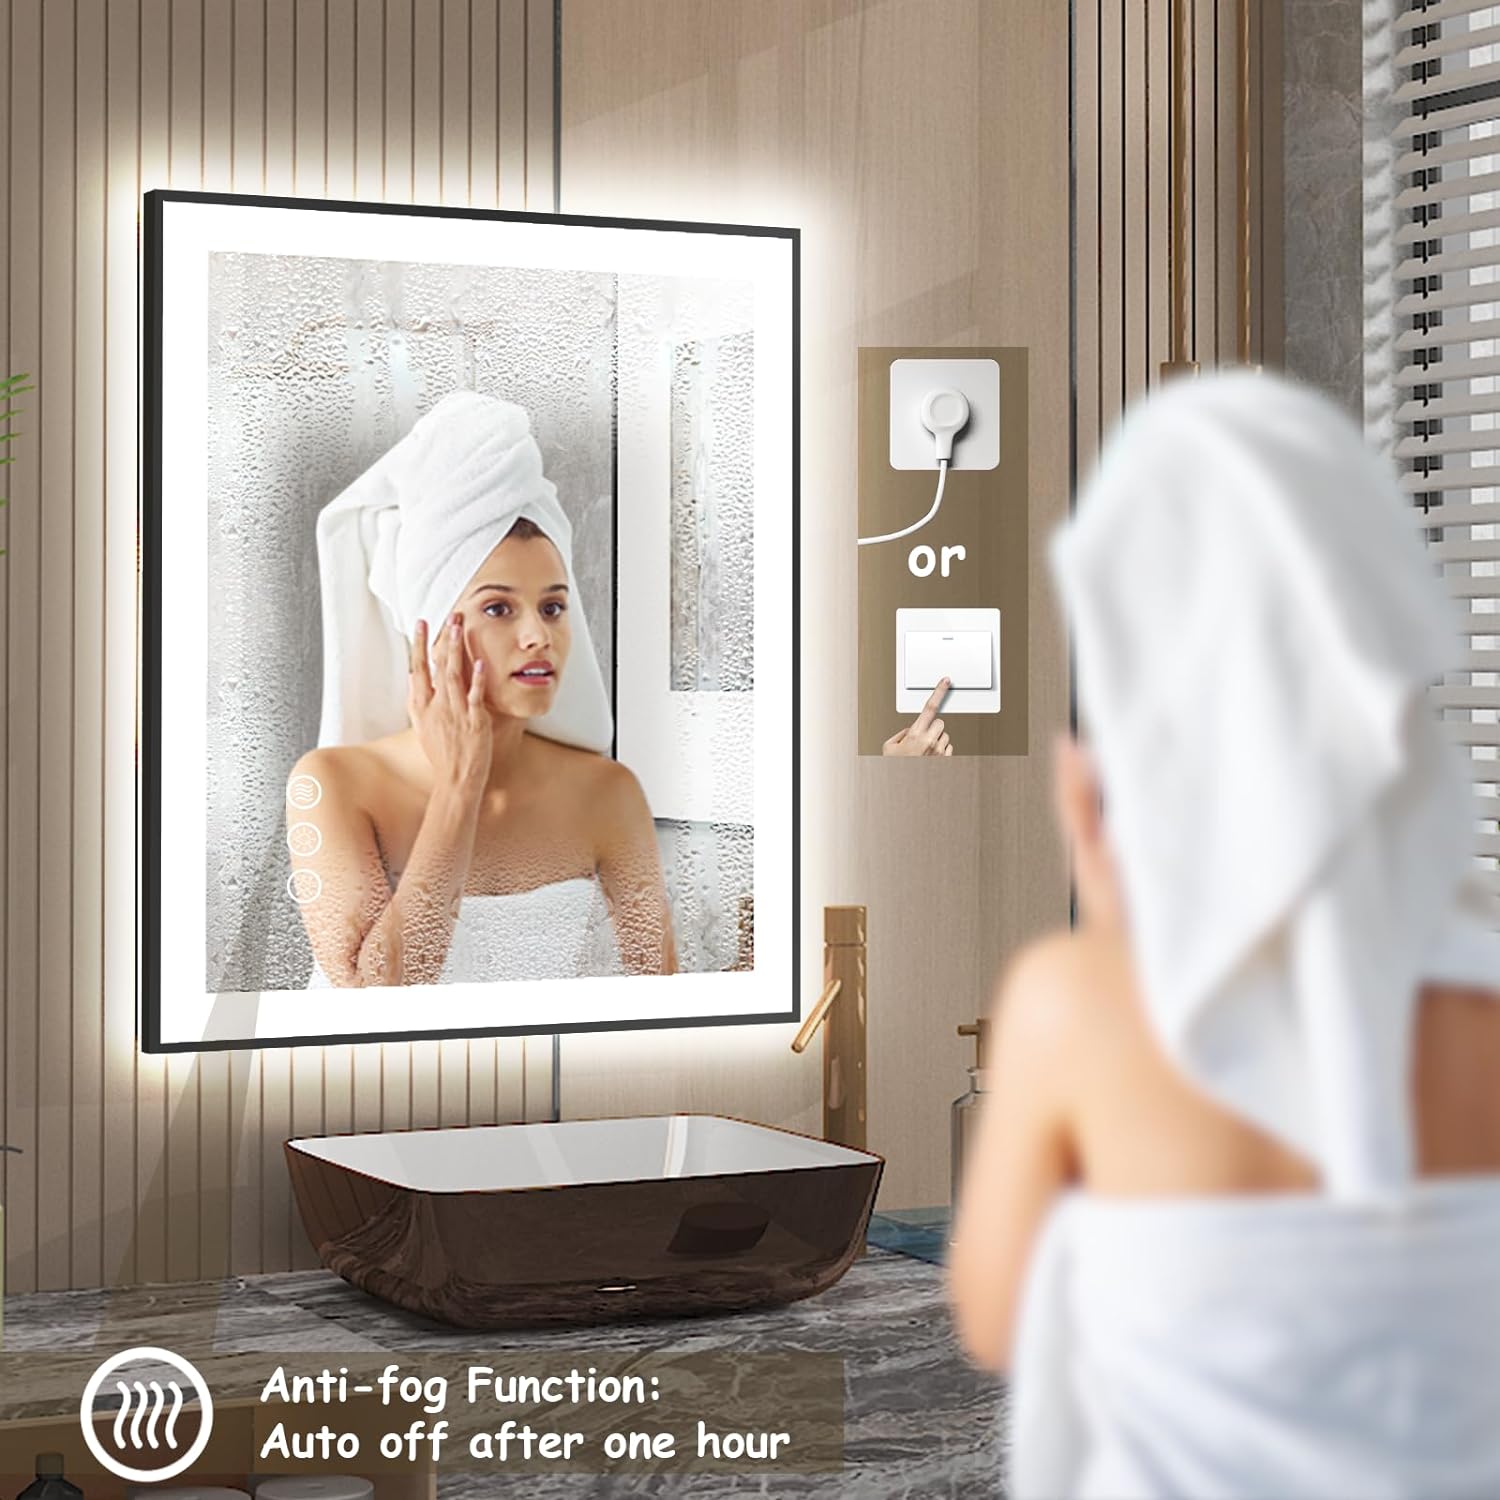 Zhuotai LED Lighted Bathroom Mirrors, Acrylic Frame Wall Mounted White Light Dimmable Anti-Fog Memory Button Waterproof CRI>90 5MM Copper Free Mirrors, Vertical & Horizontal